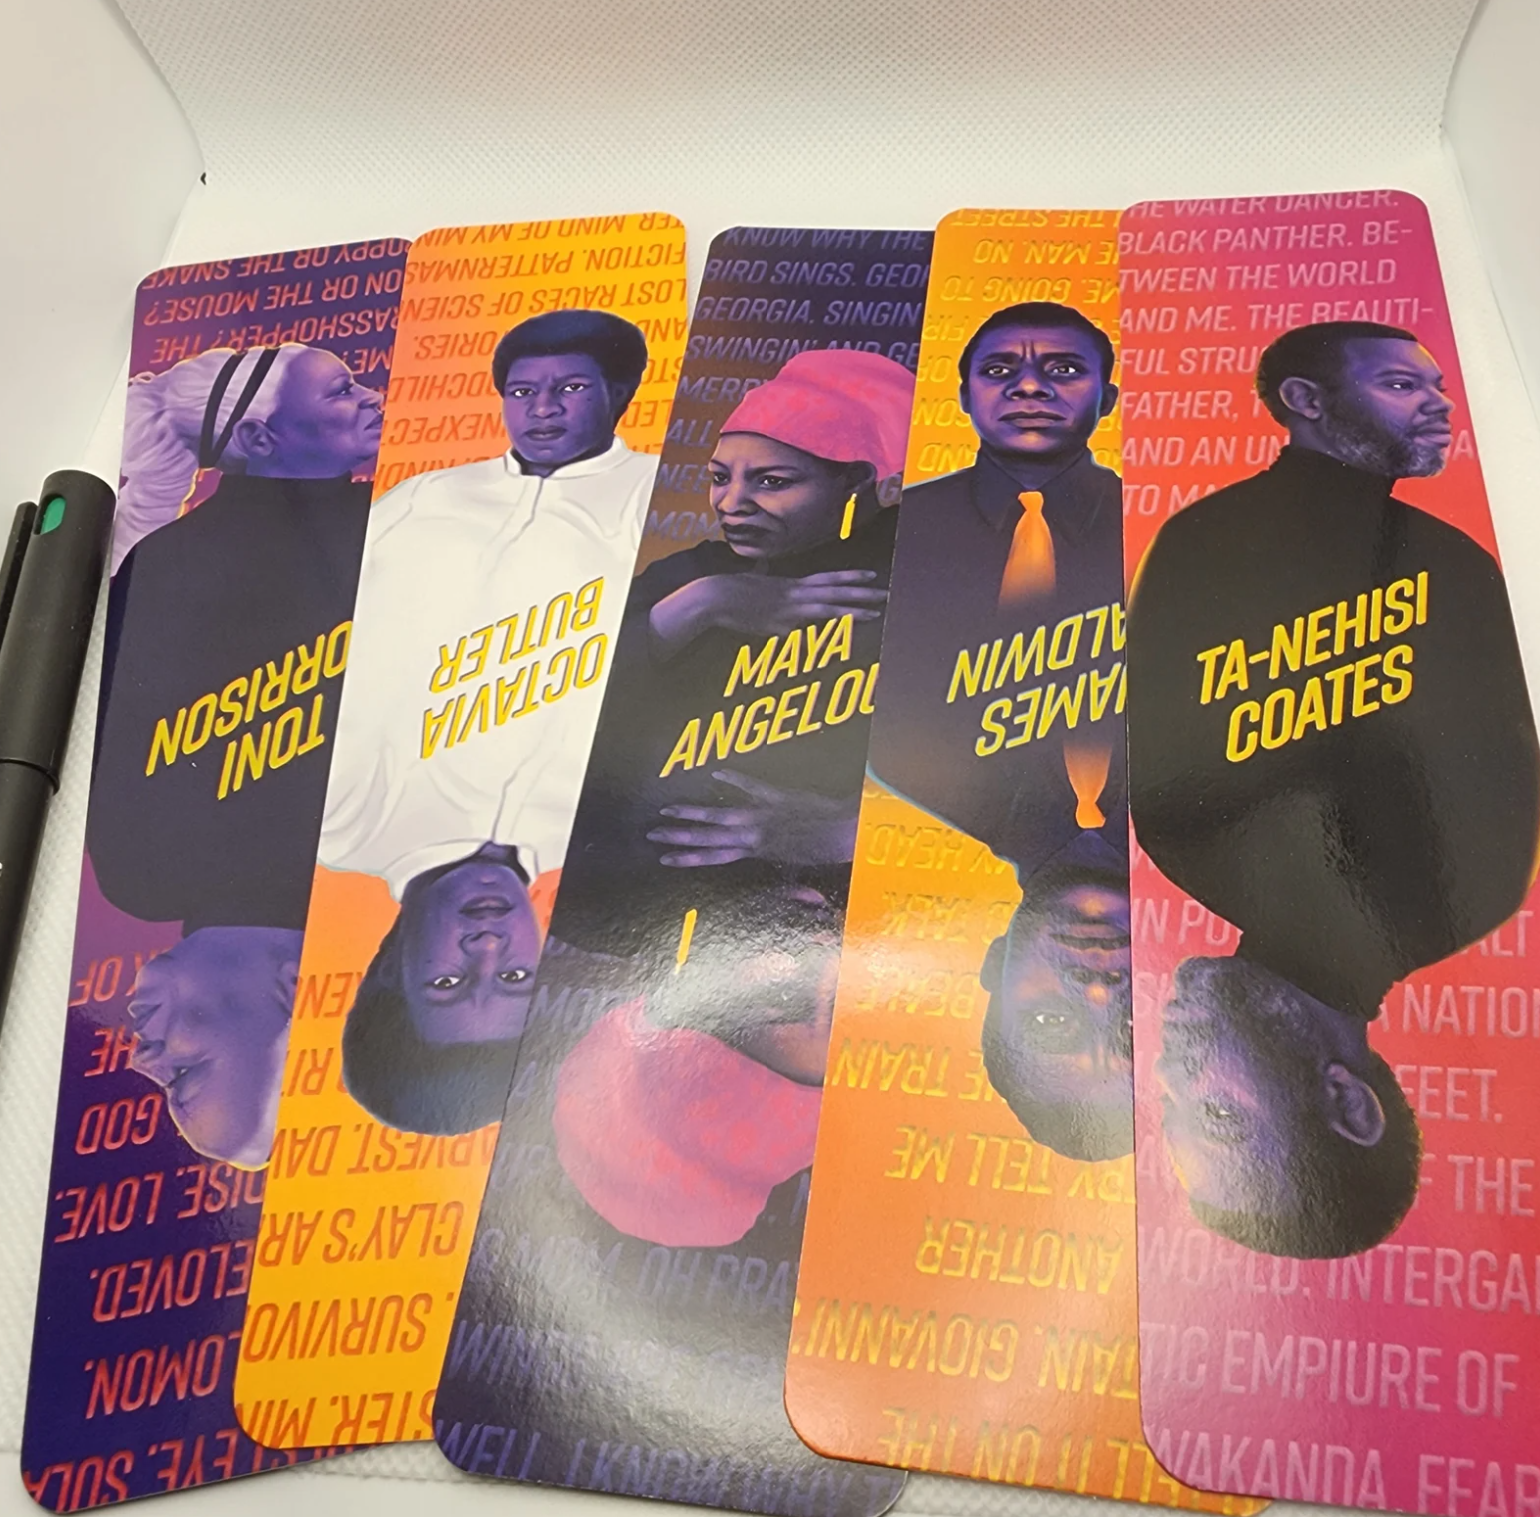 A colorful array of bookmarks in orange, purple, and bright pink featuring mirrored images of famous black authors including Octavia Butler, Toni Morrison, and James Baldwin. 